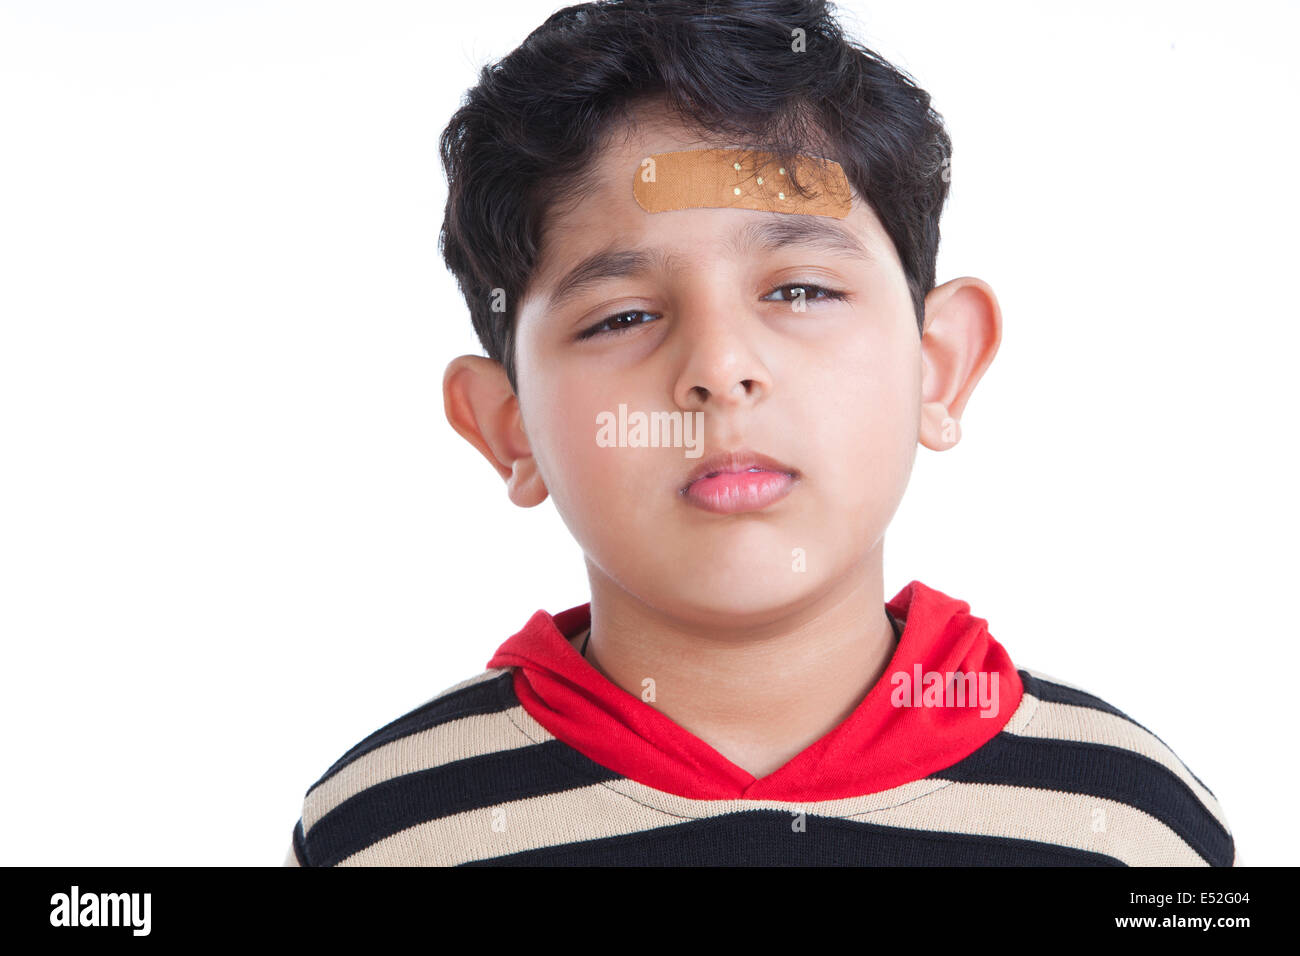 Portrait of little boy with band-aid on forehead Stock Photo